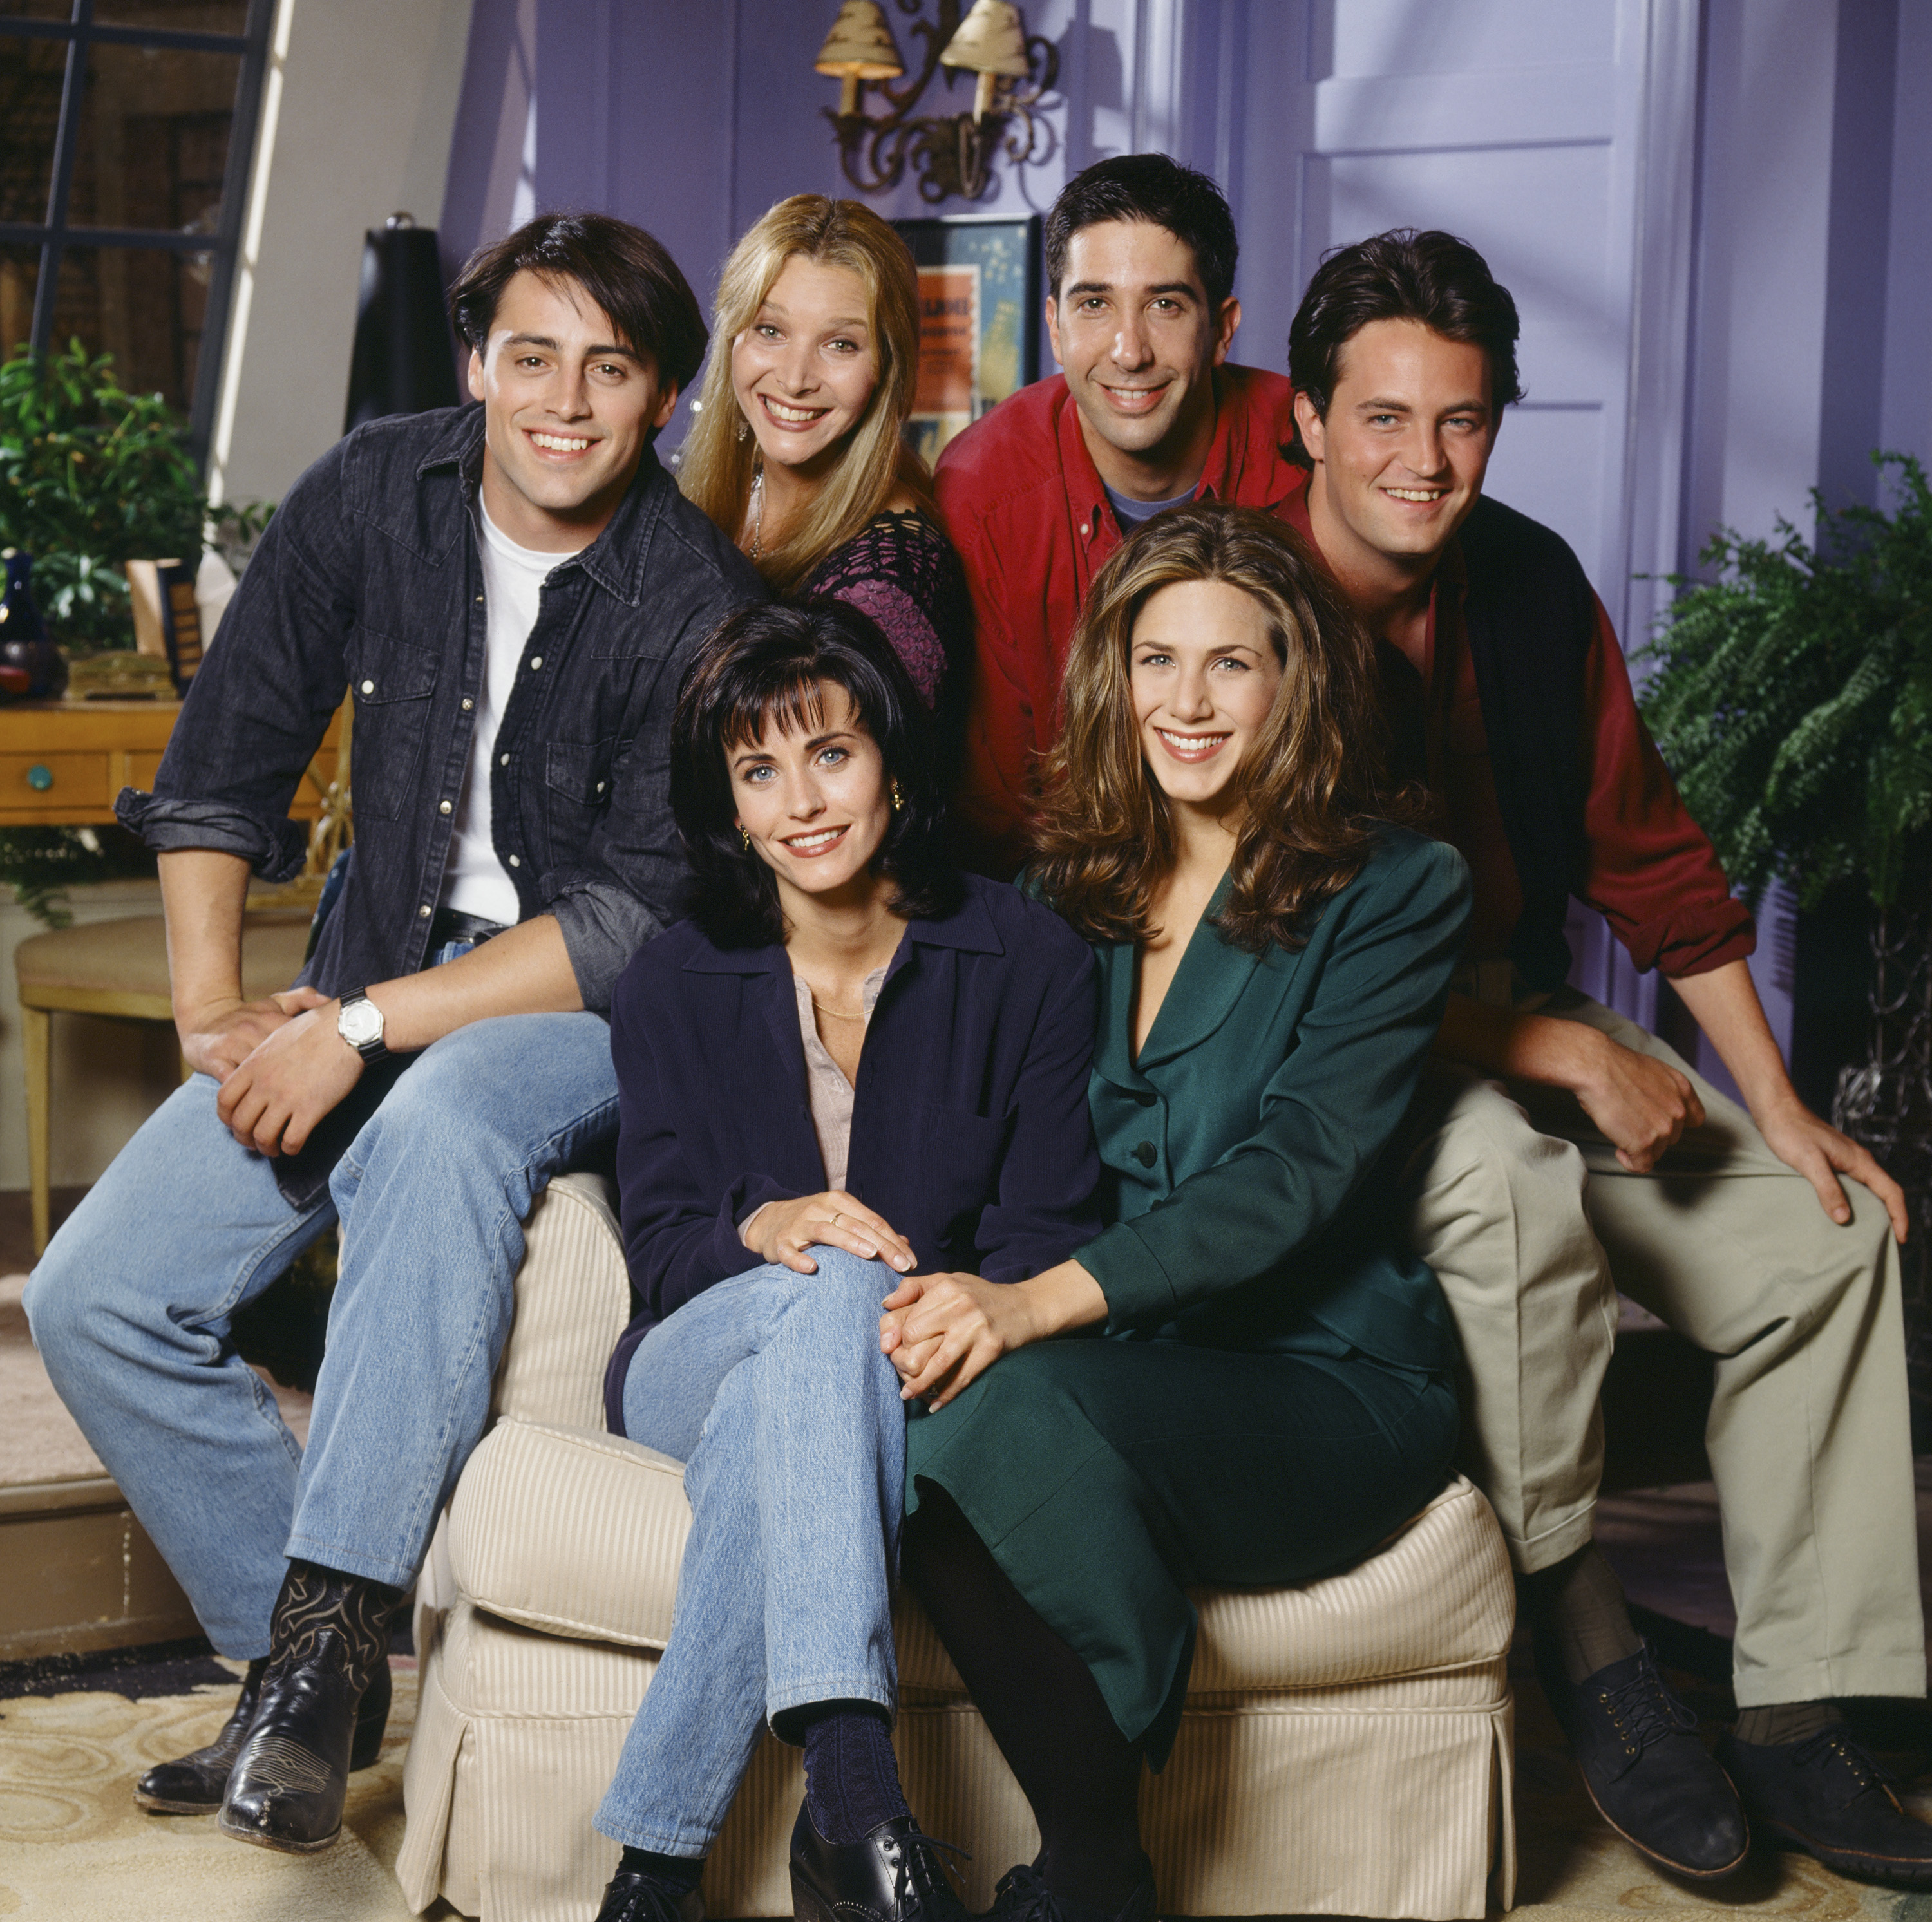 (Back L-R) Matt LeBlanc, Lisa Kudrow, David Schwimmer, Matthew Perry (Front L-R) Courteney Cox, and Jennifer Aniston on the set of "Friends," in 1994 | Source: Getty Images